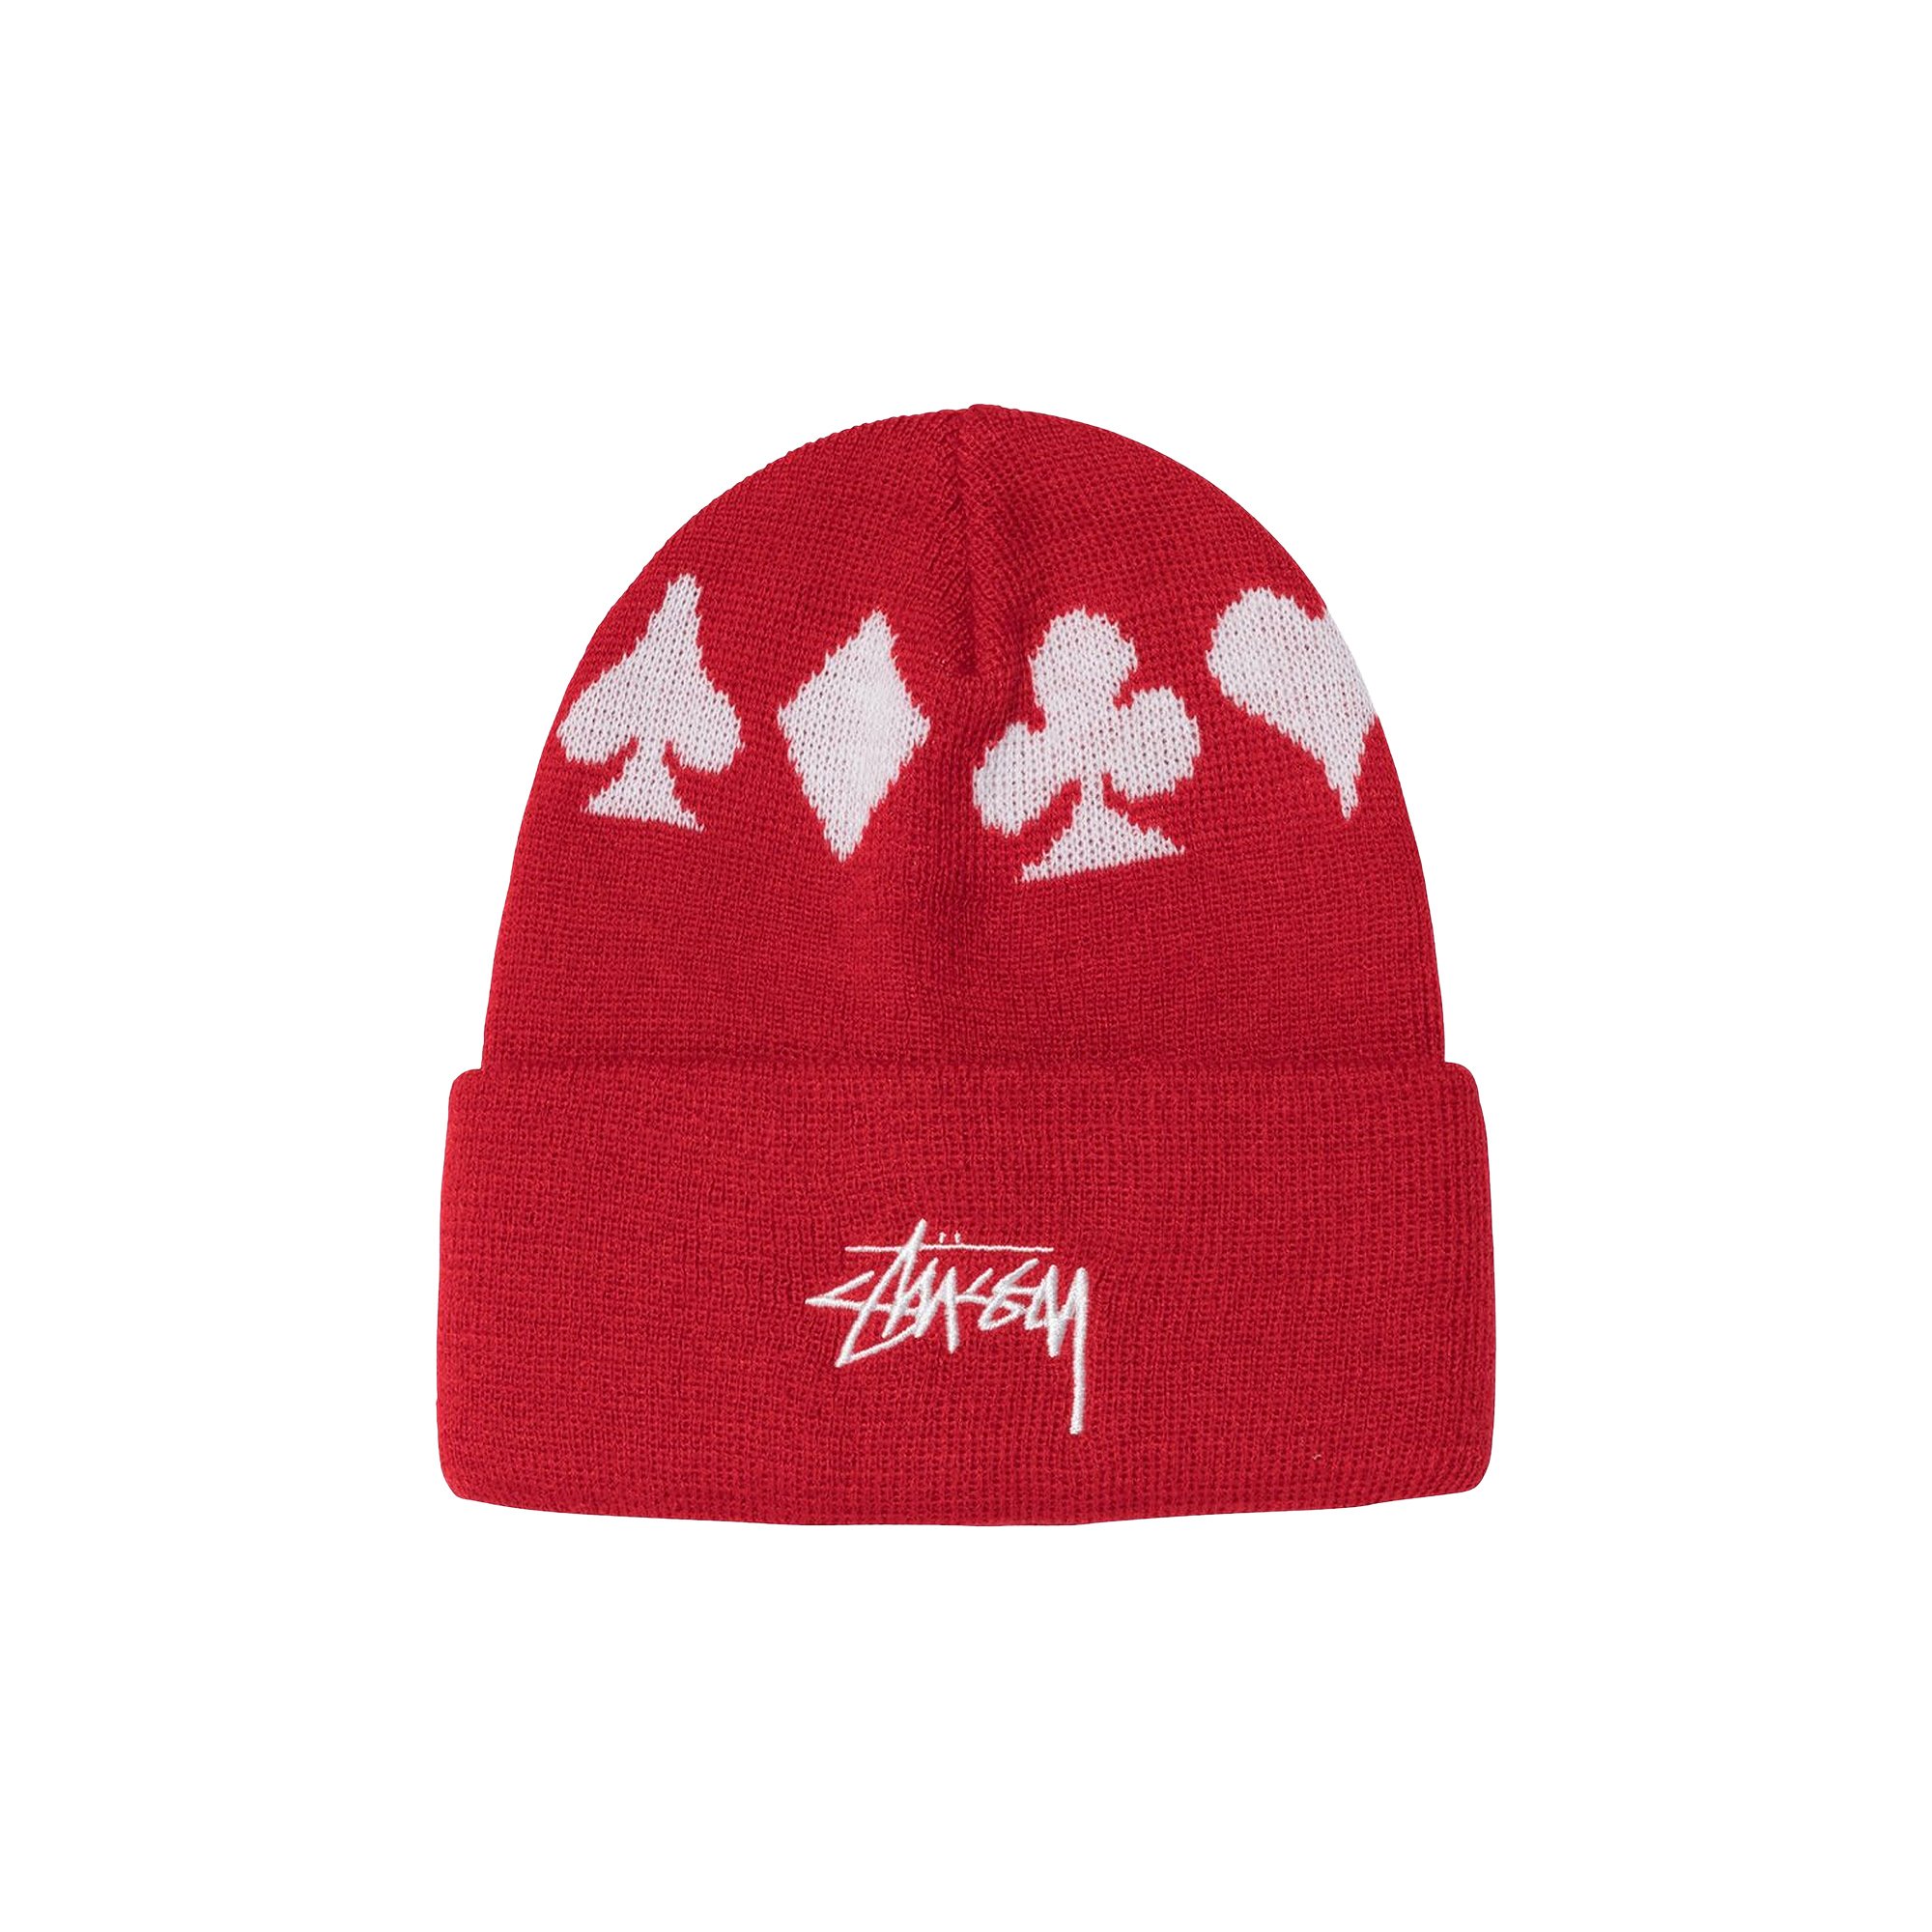 Buy Stussy Full Suite Jacquard Cuff Beanie 'Red' - 1321060 RED | GOAT